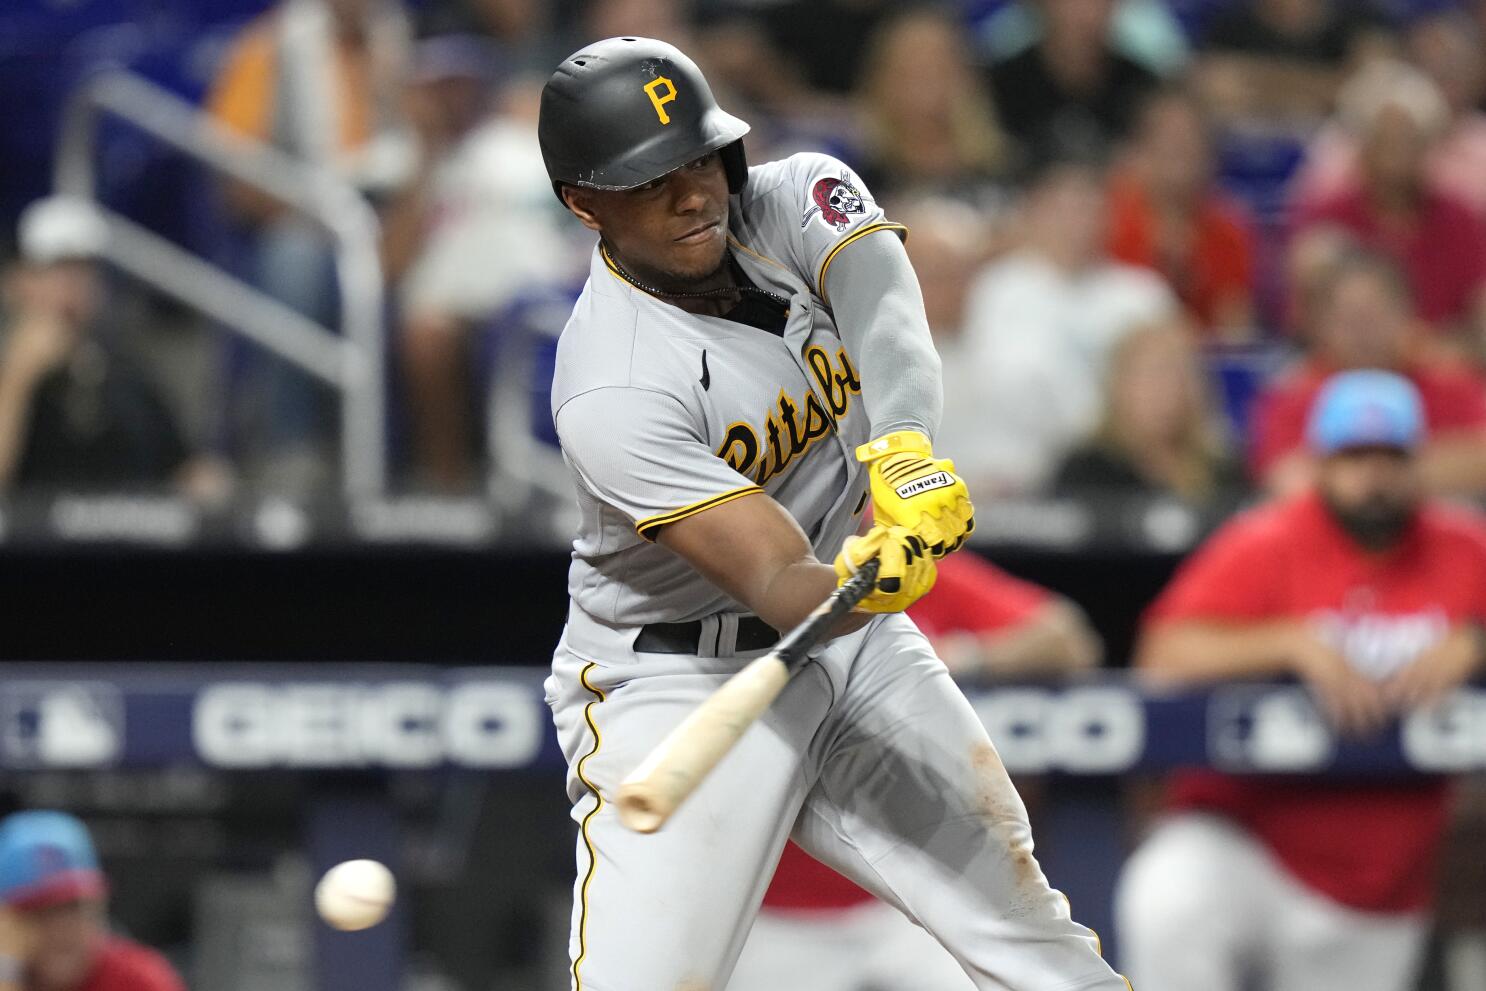 Pirates find 'Key' to bounce-back game, as Ke'Bryan Hayes leads